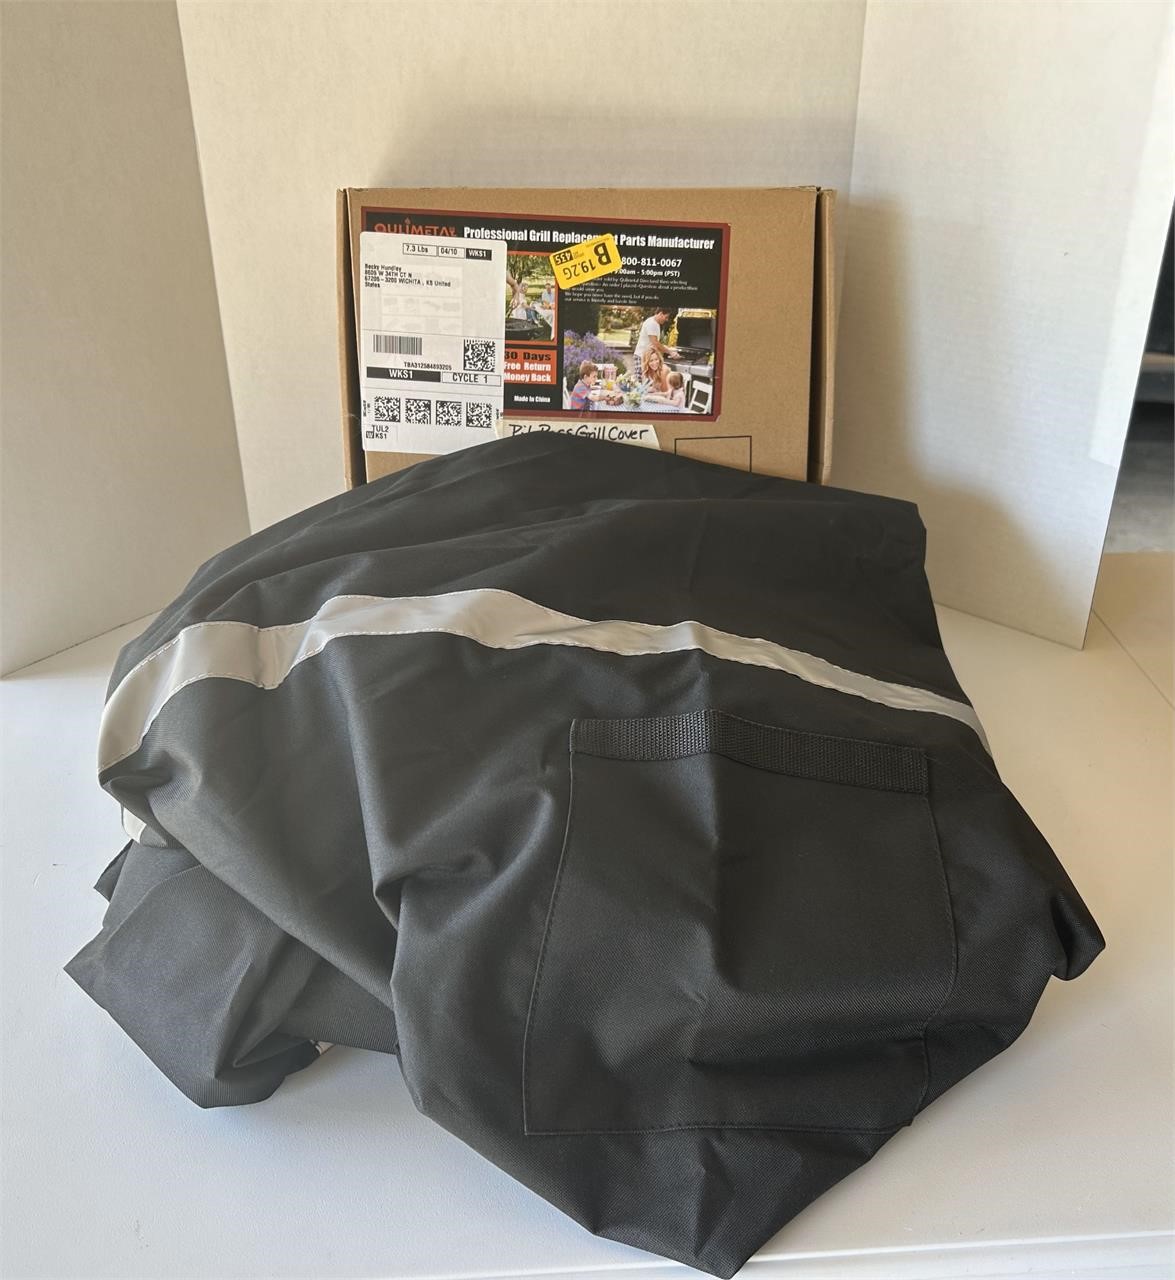 New Grill Cover - never used